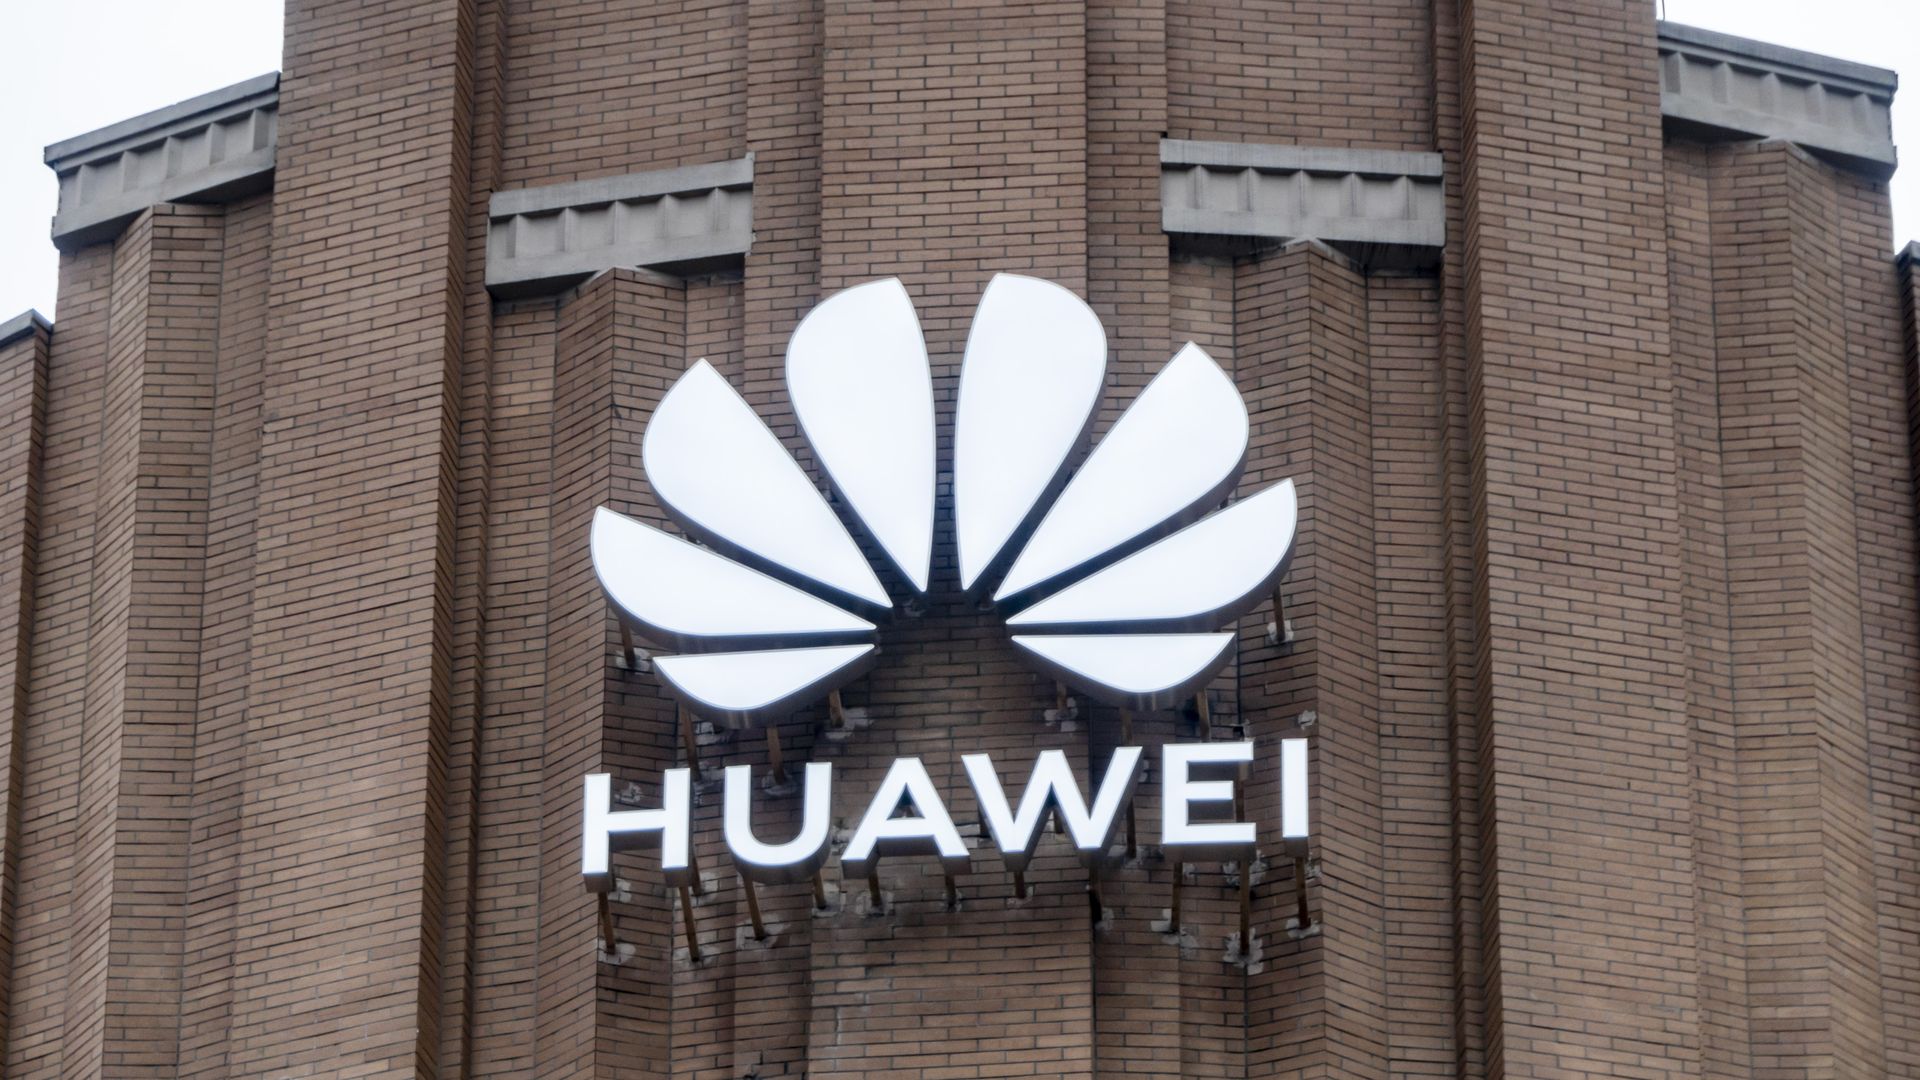 A photo of the facade of Huawei's largest flagship store in the world in Shanghai, China.